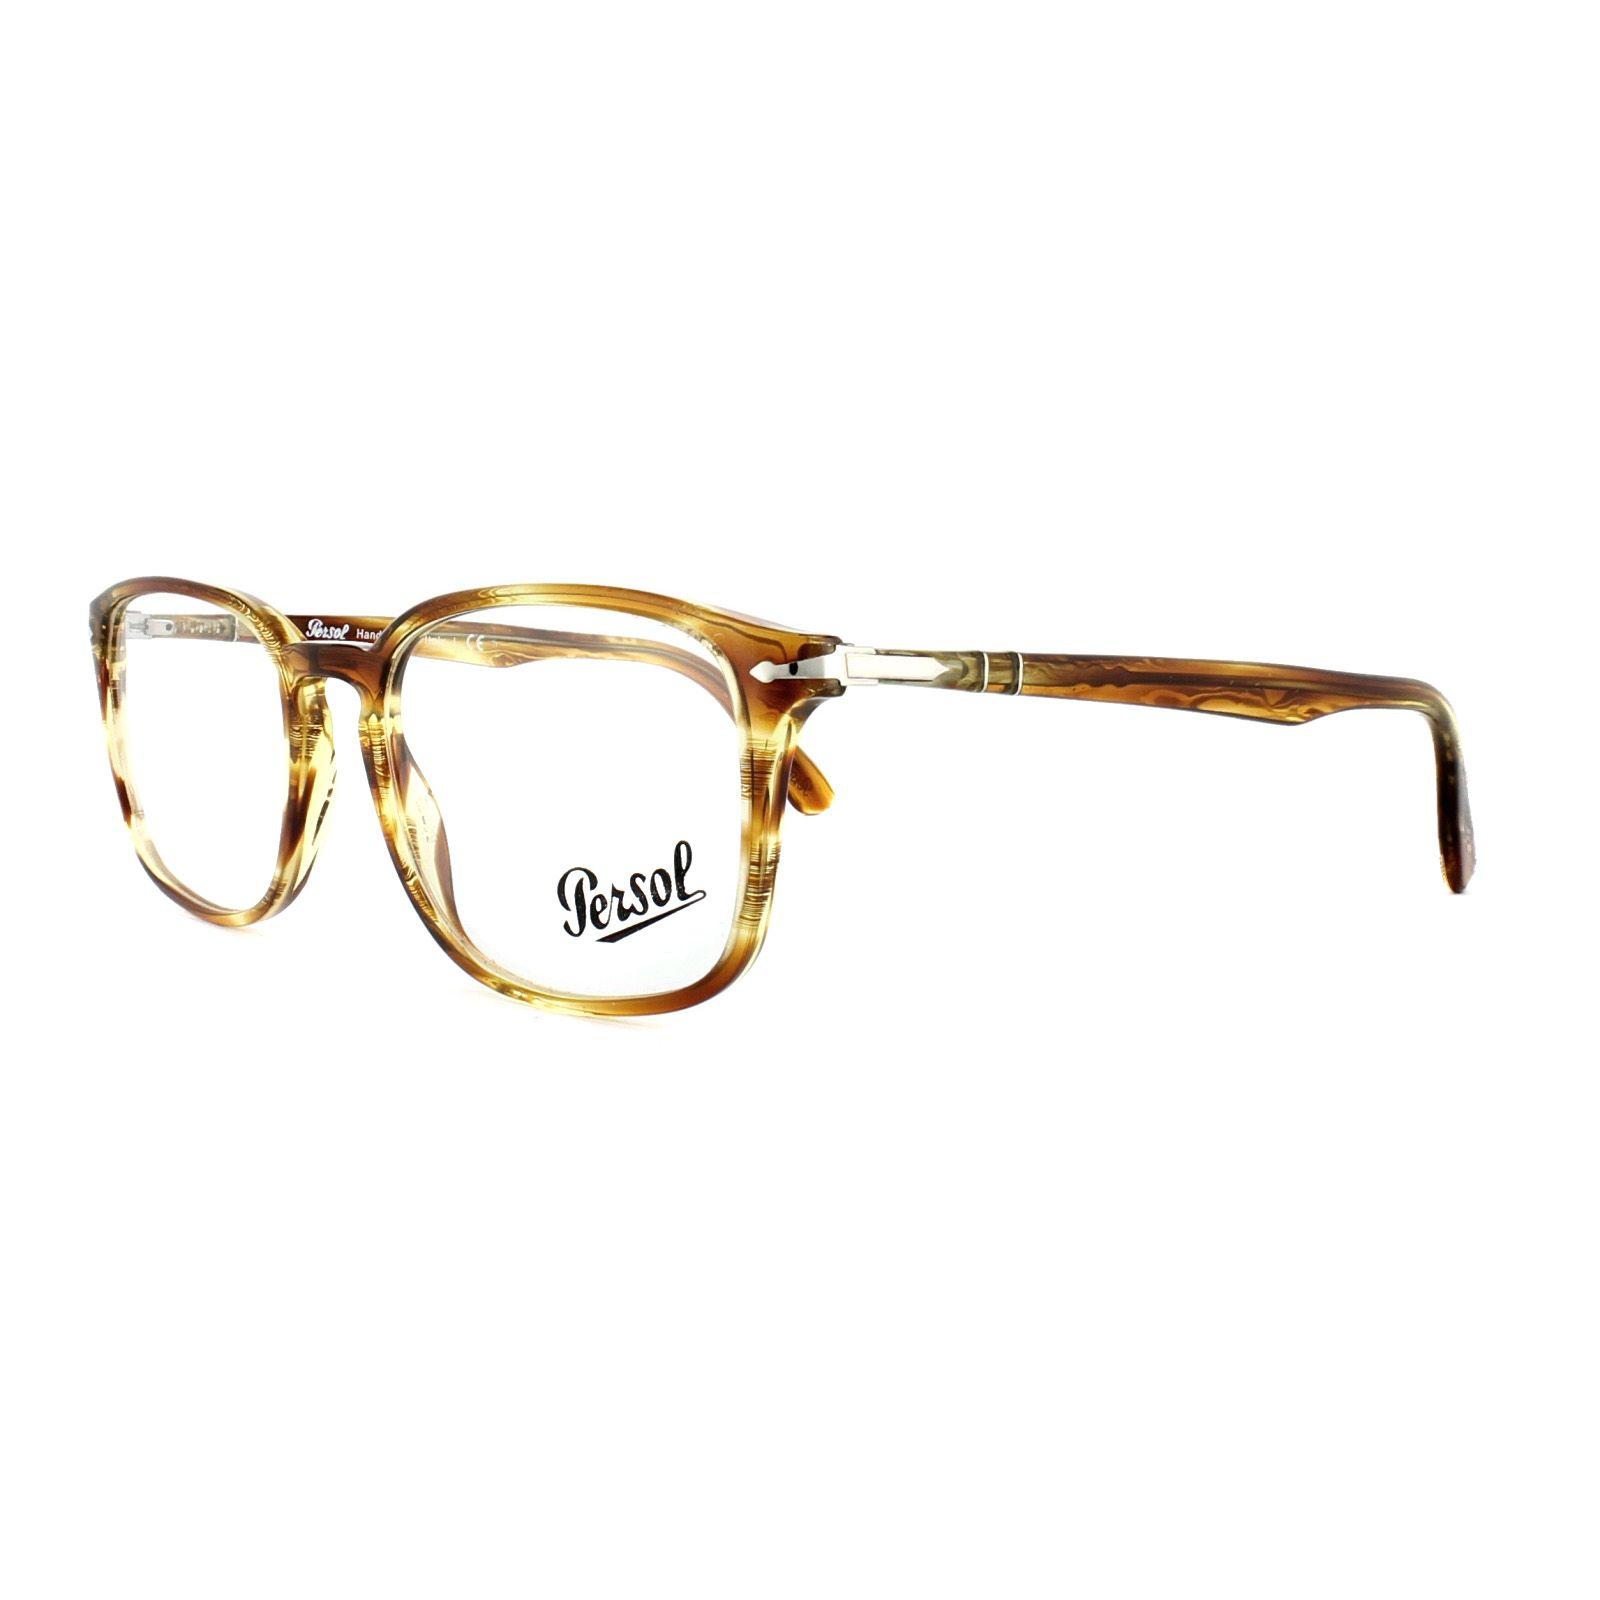 Striped Brown and Yellow Logo - Persol Glasses Frames PO3161V 1050 Striped Brown Yellow 52mm Mens